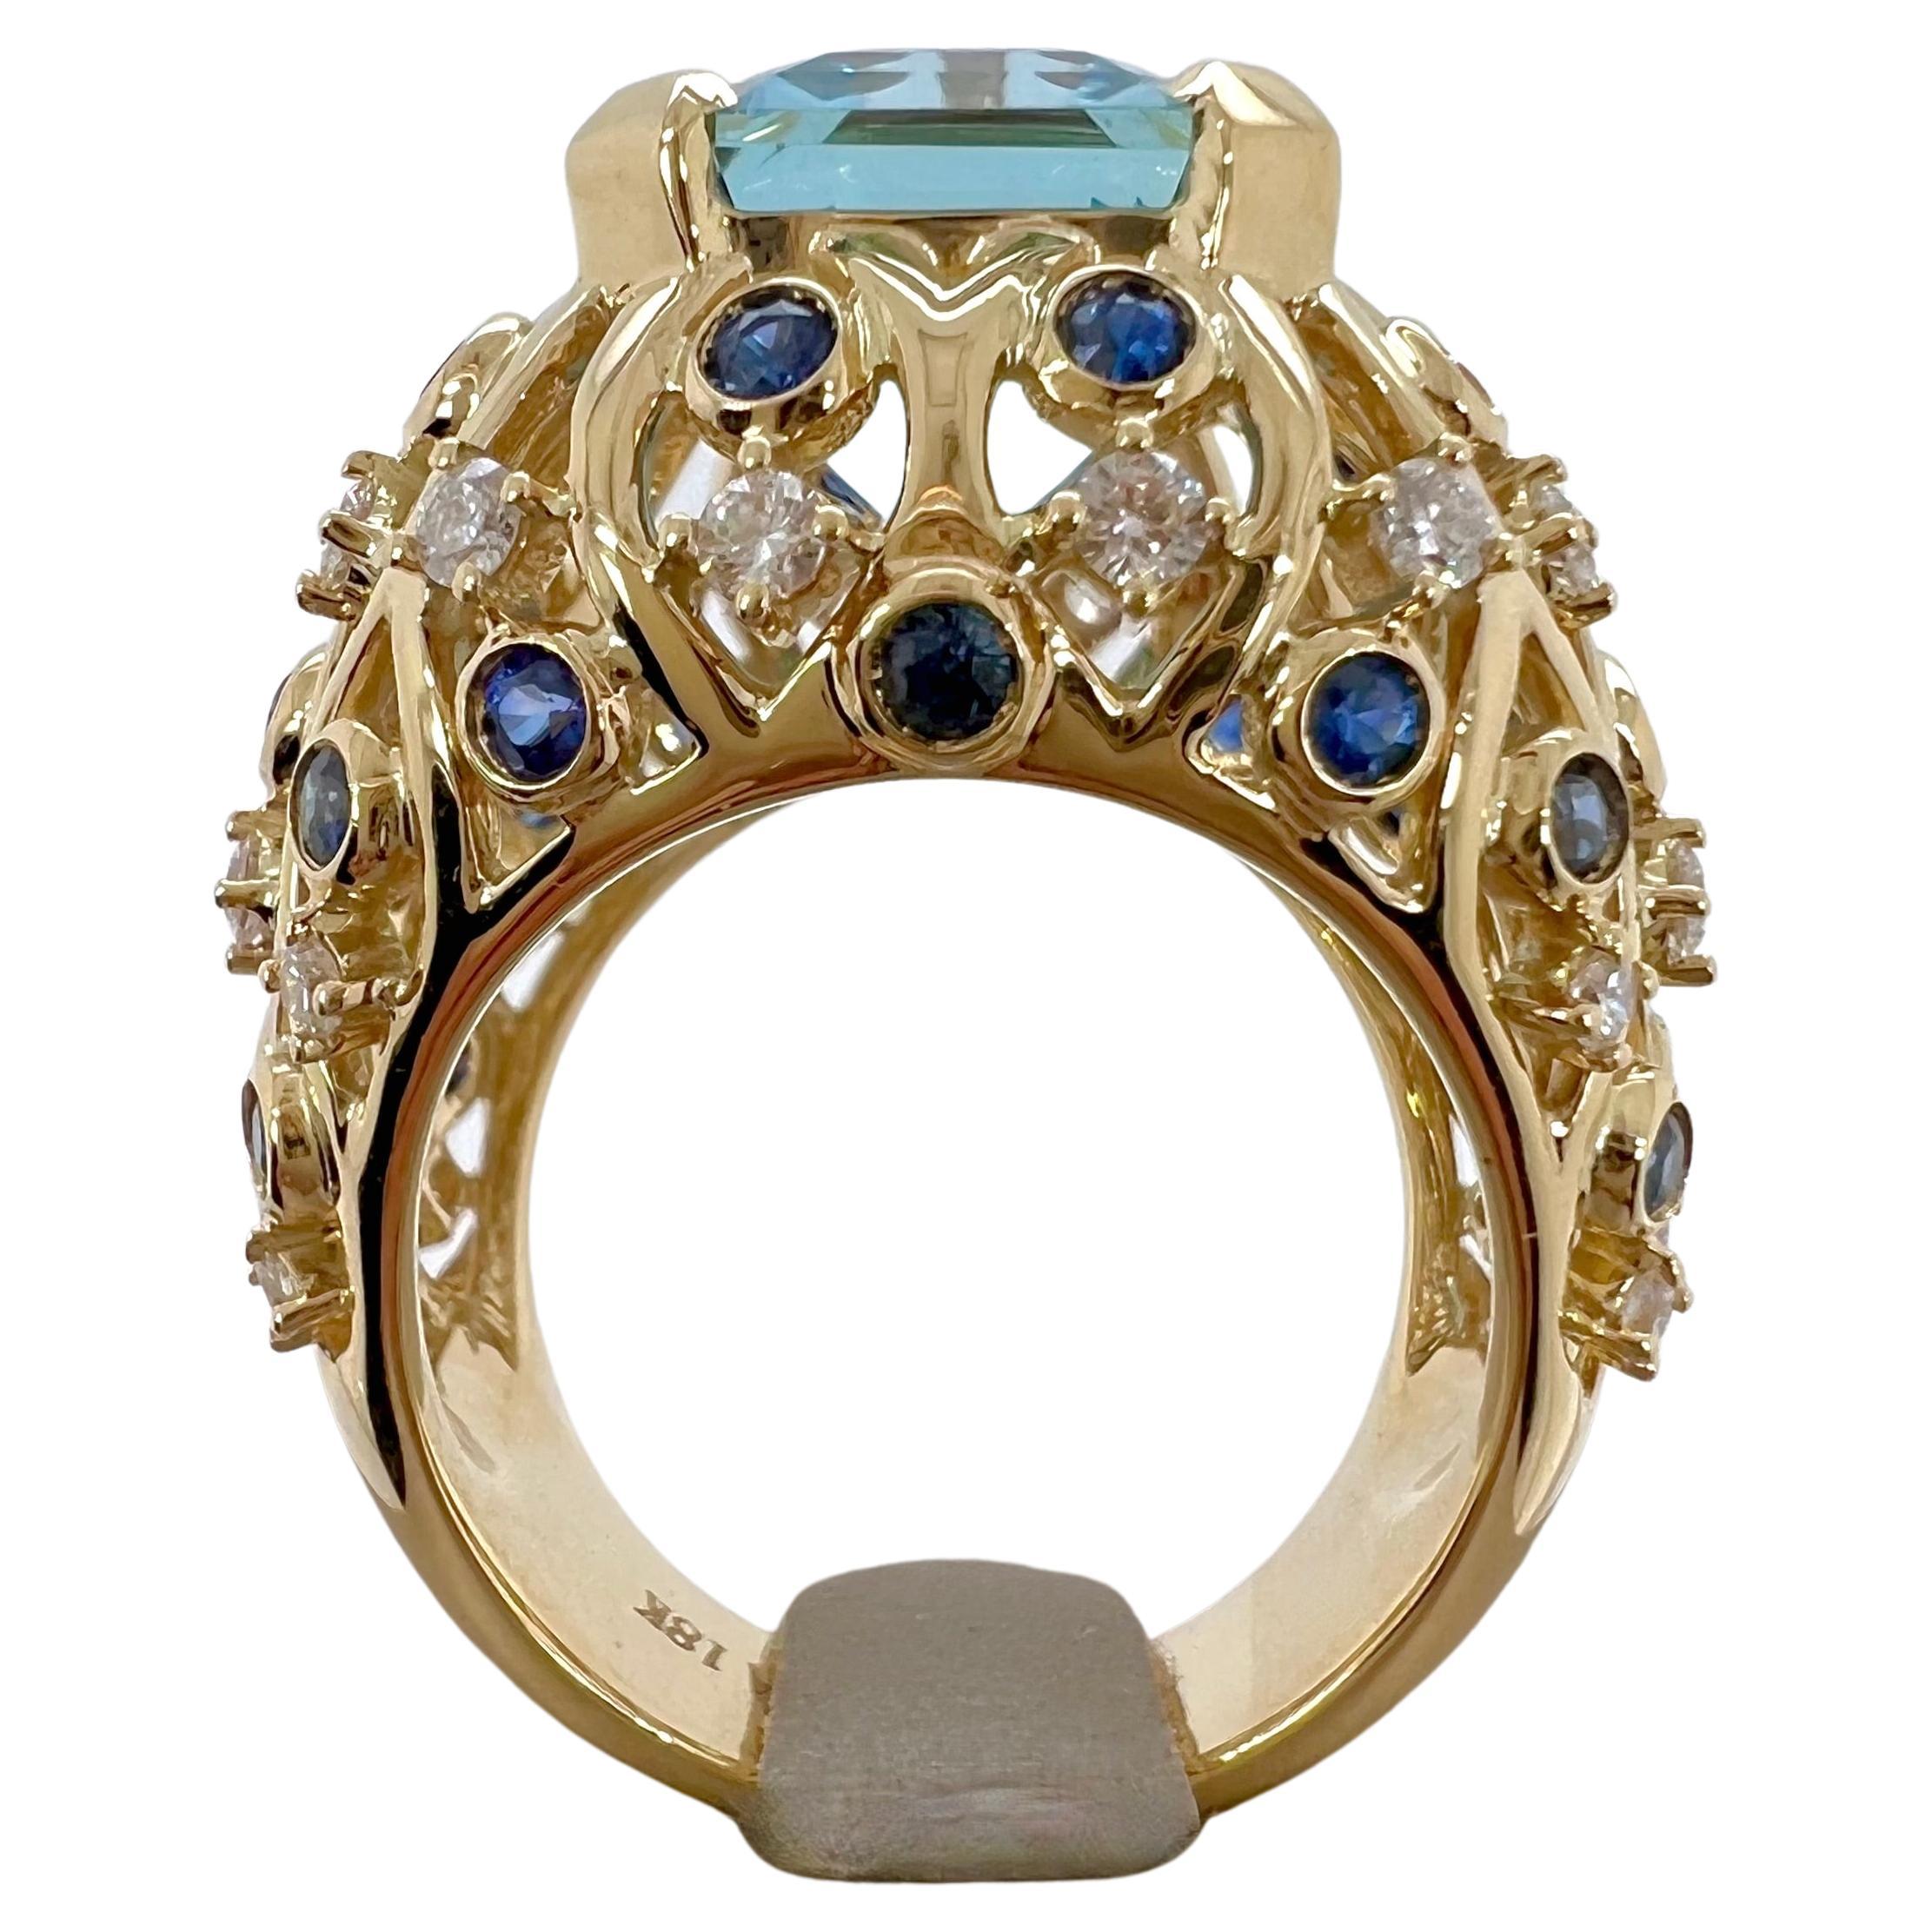 This immaculate aquamarine is set in a handmade setting with blue sapphires and diamonds on 18k yellow gold.  The crips, blue hue of the aquamarine captivates, while the blue sapphires and diamonds complement the stone perfectly.  This ring is a